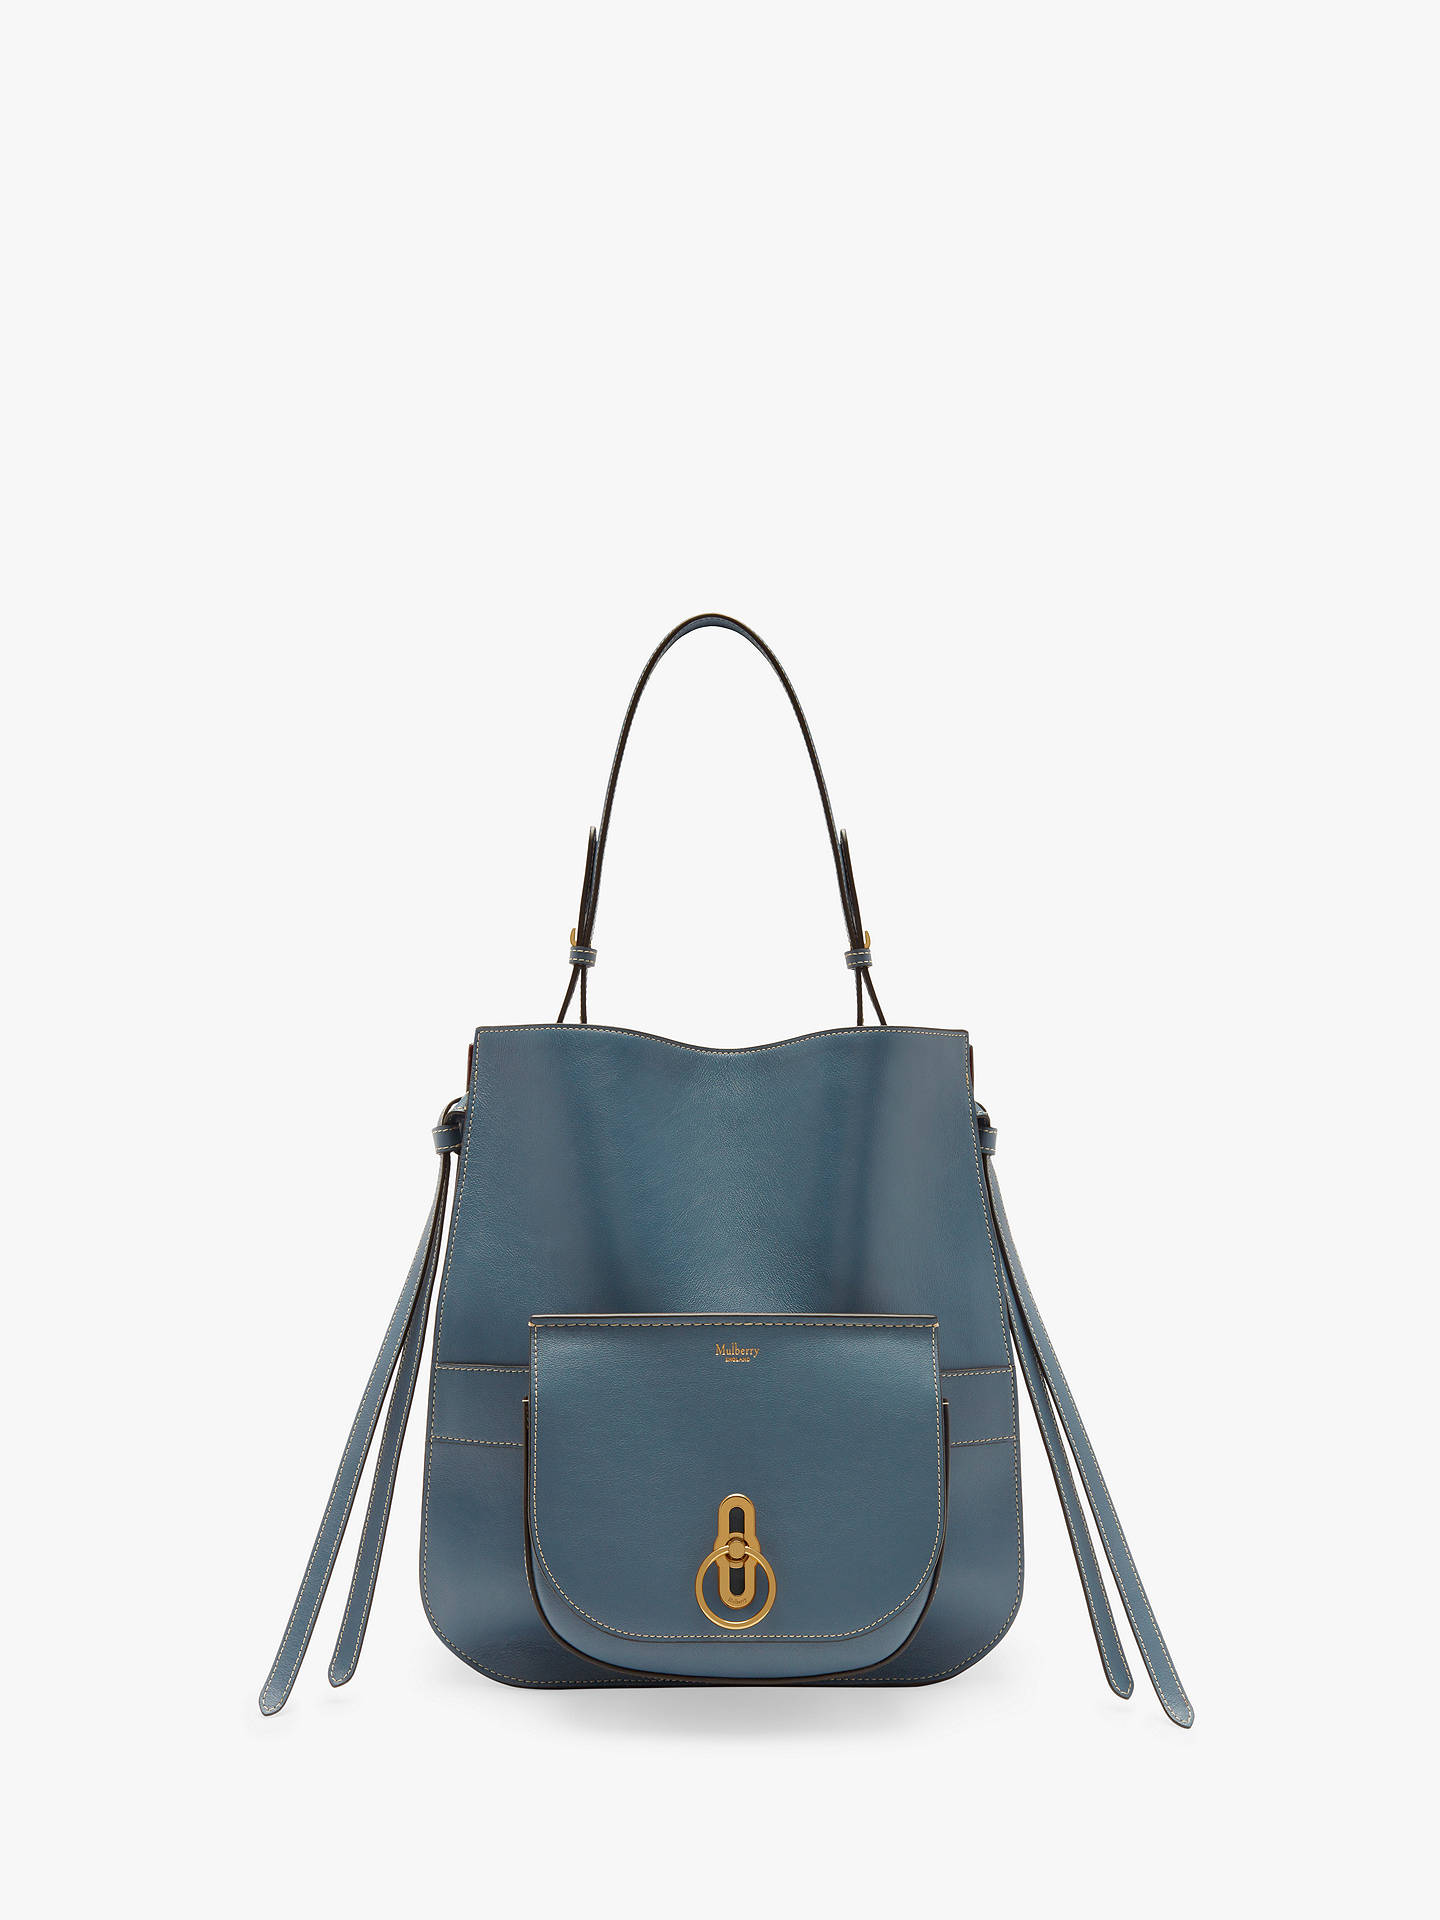 Mulberry Amberley Small Classic Grain Leather Hobo Bag at John Lewis ...